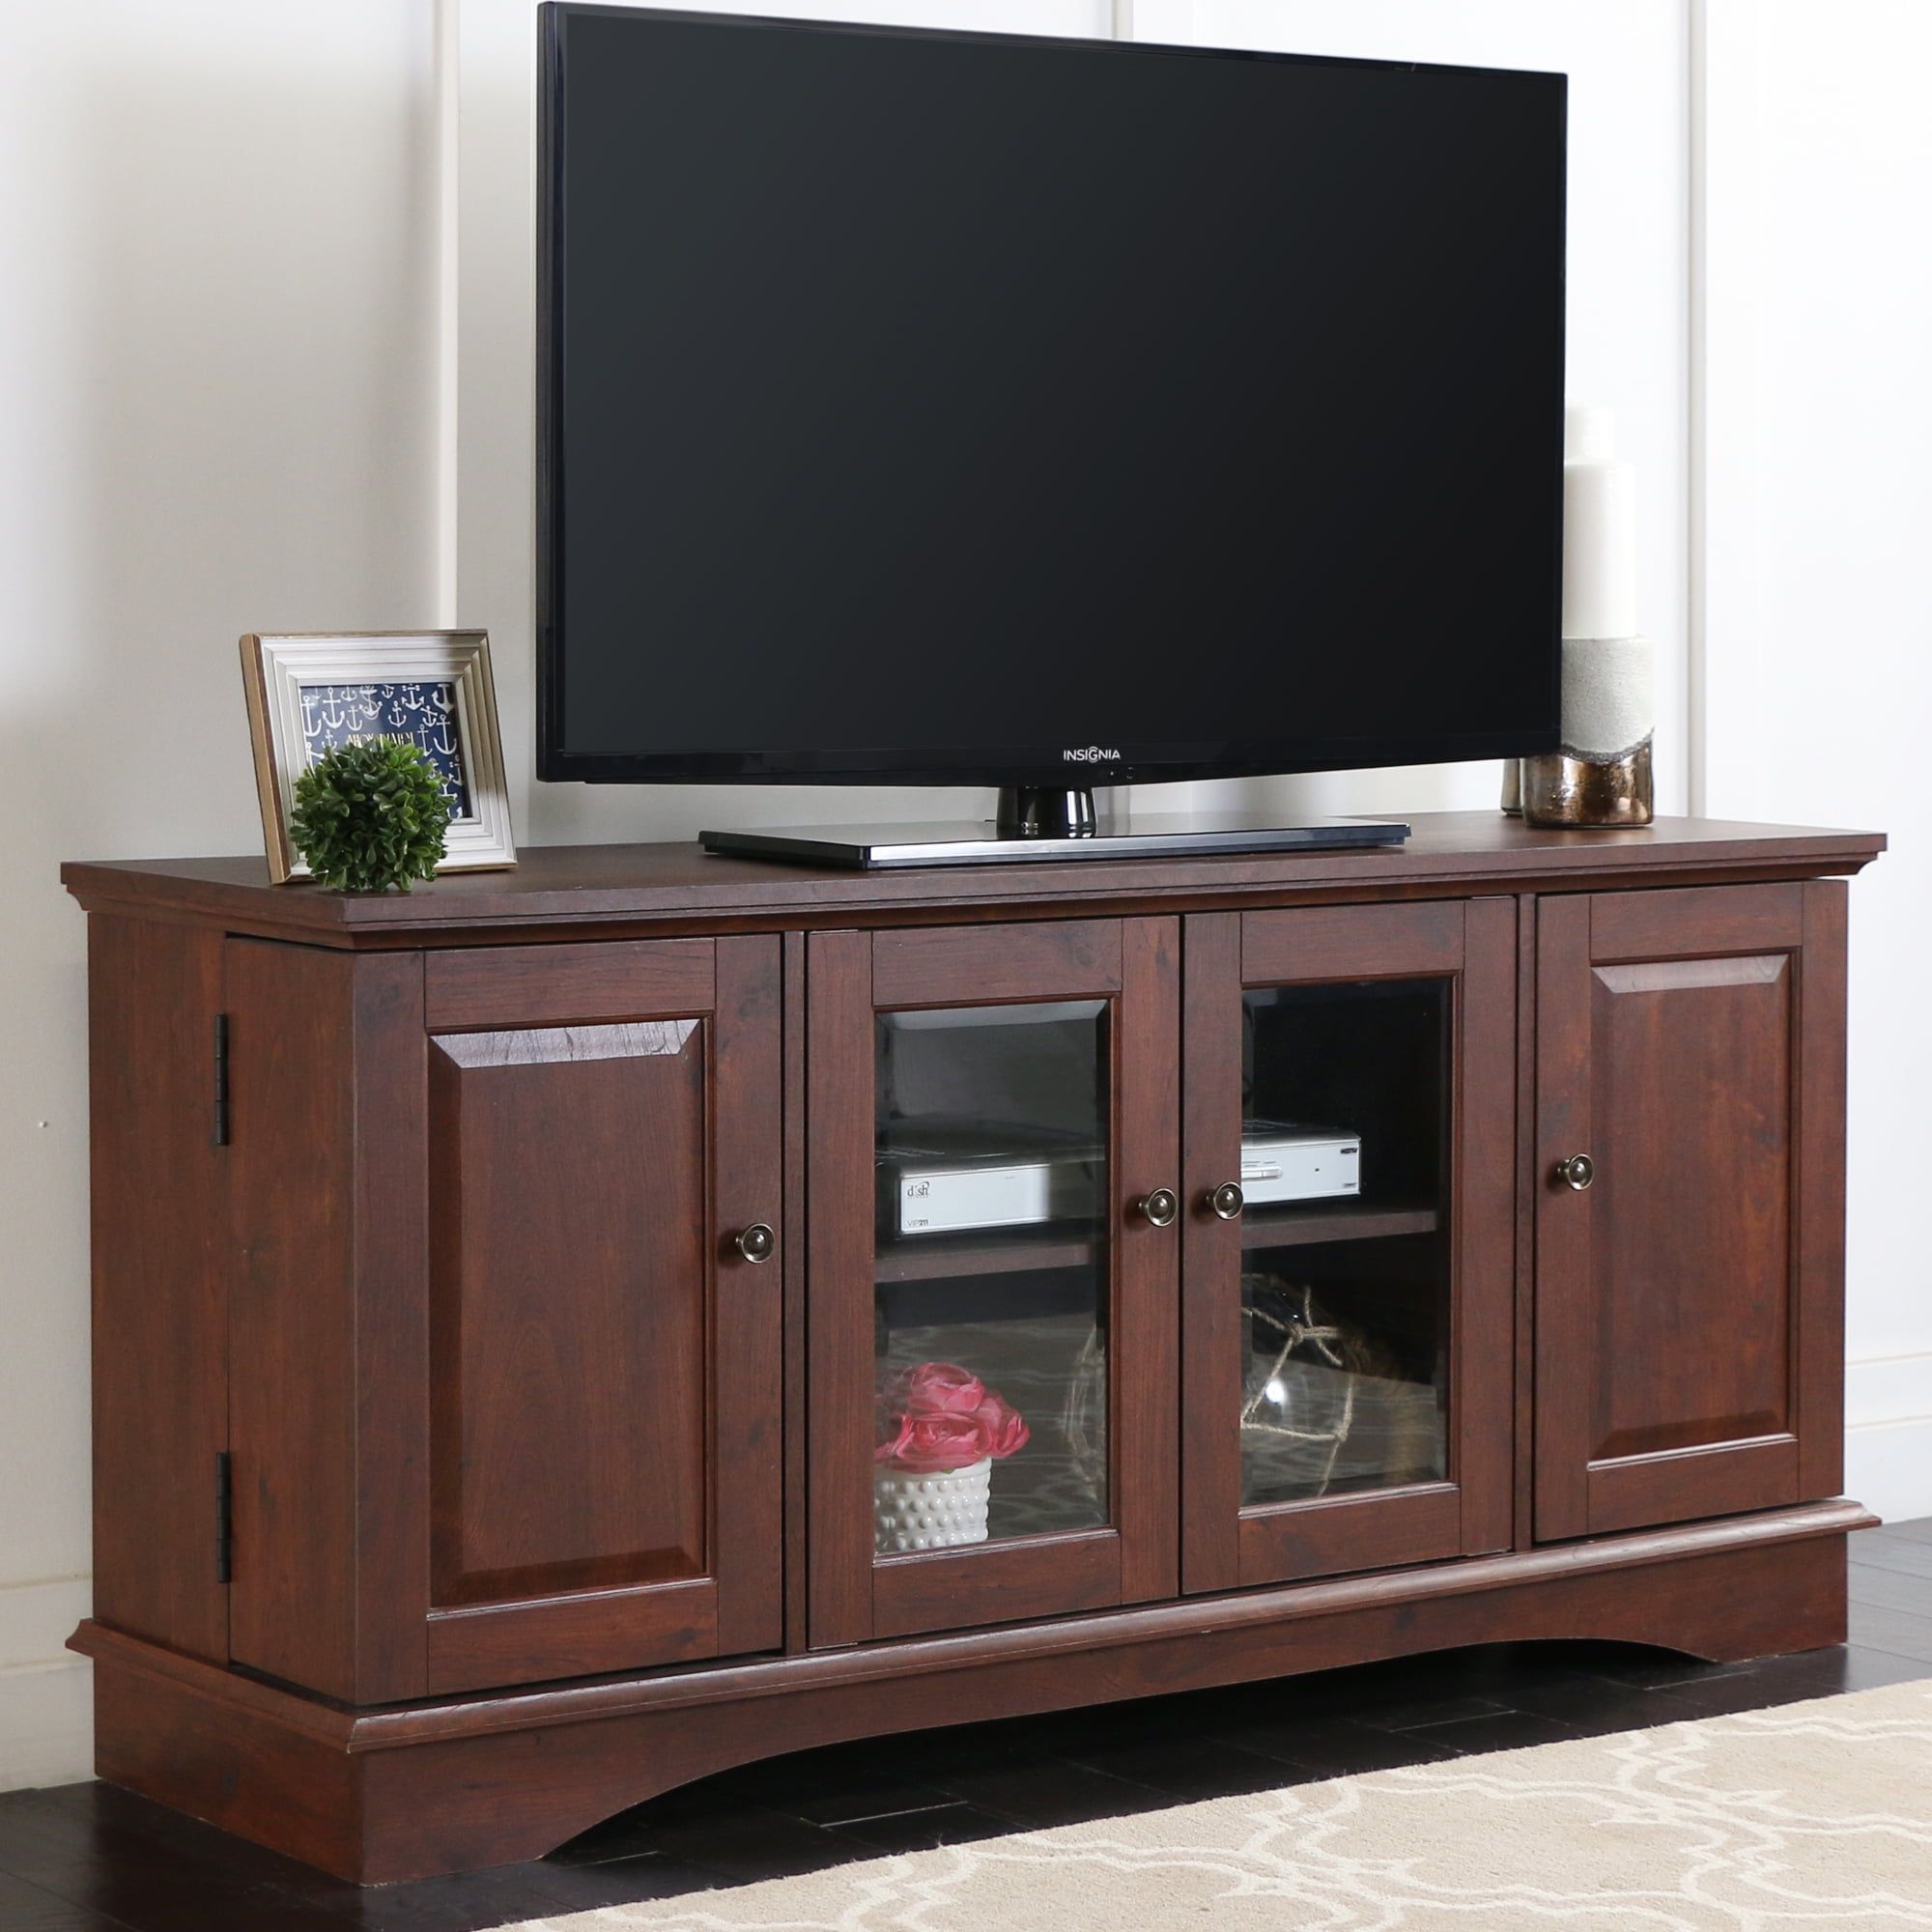 Walker Edison Wood Tv Stand For Tvs Up To 58?, Traditional Brown – Home In 110" Tvs Wood Tv Cabinet With Drawers (View 12 of 20)